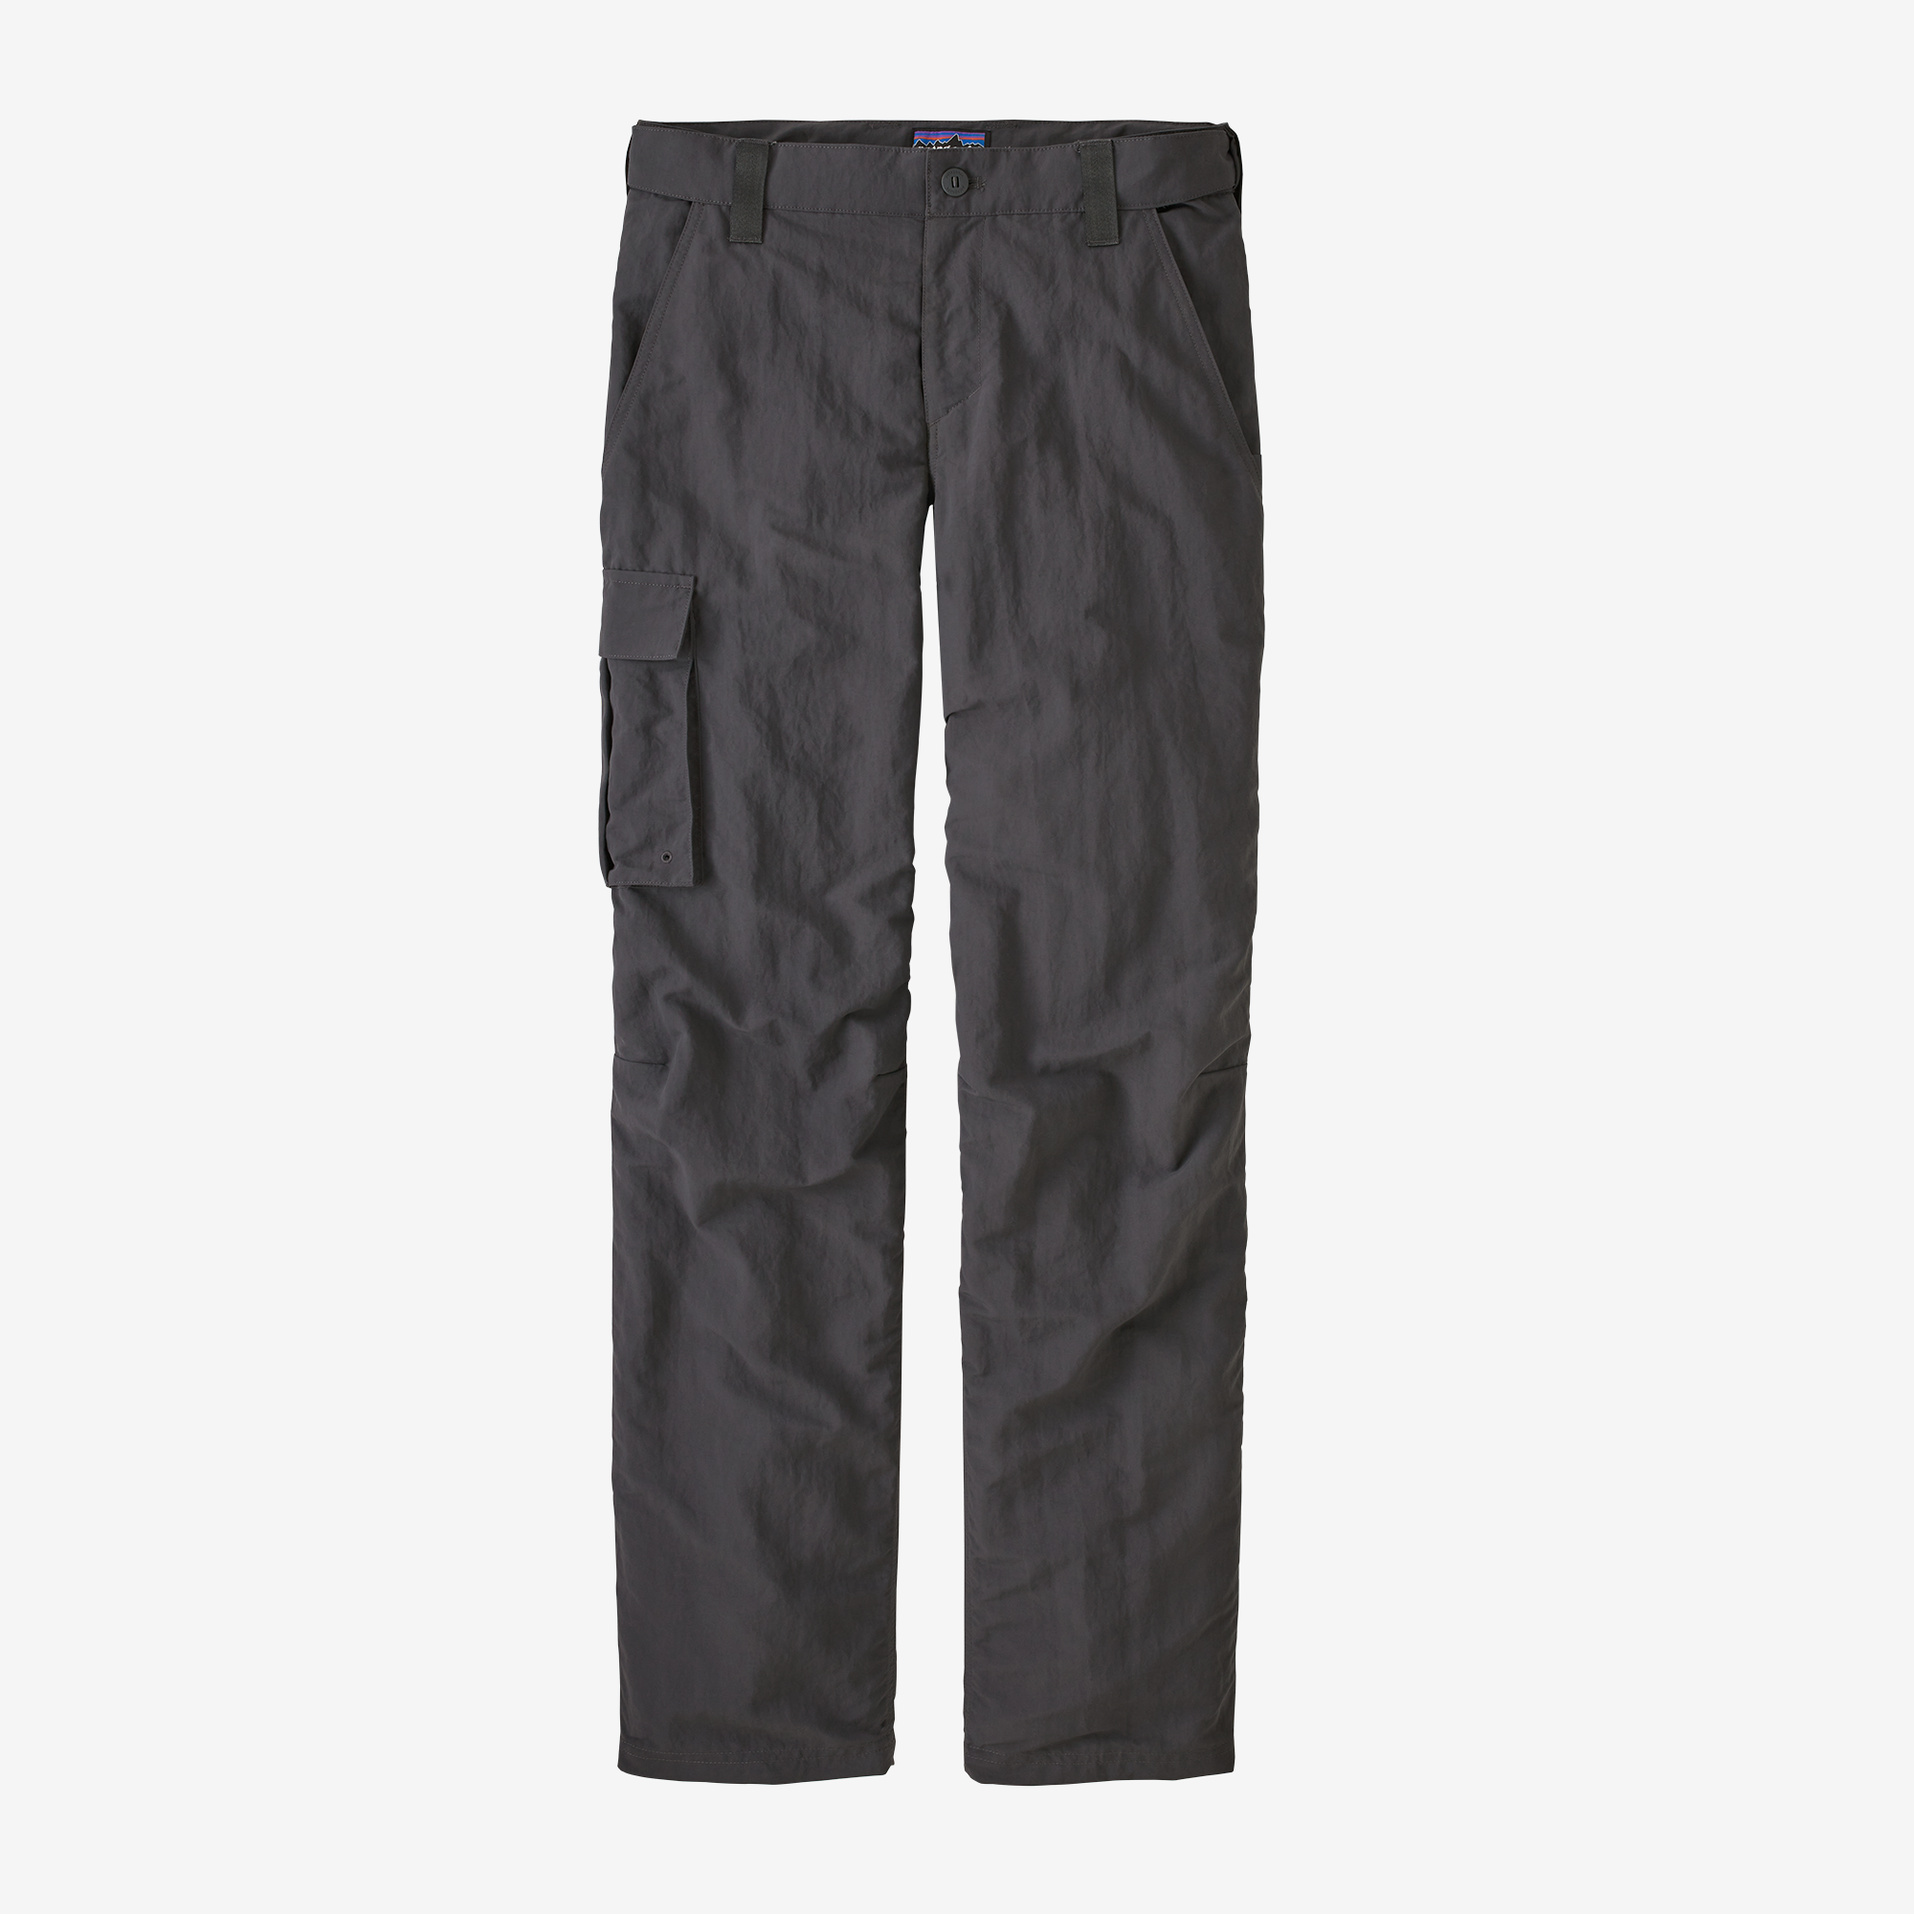 Patagonia M's Swiftcurrent Wet Wade Pants - Regular - Forge Grey - XL